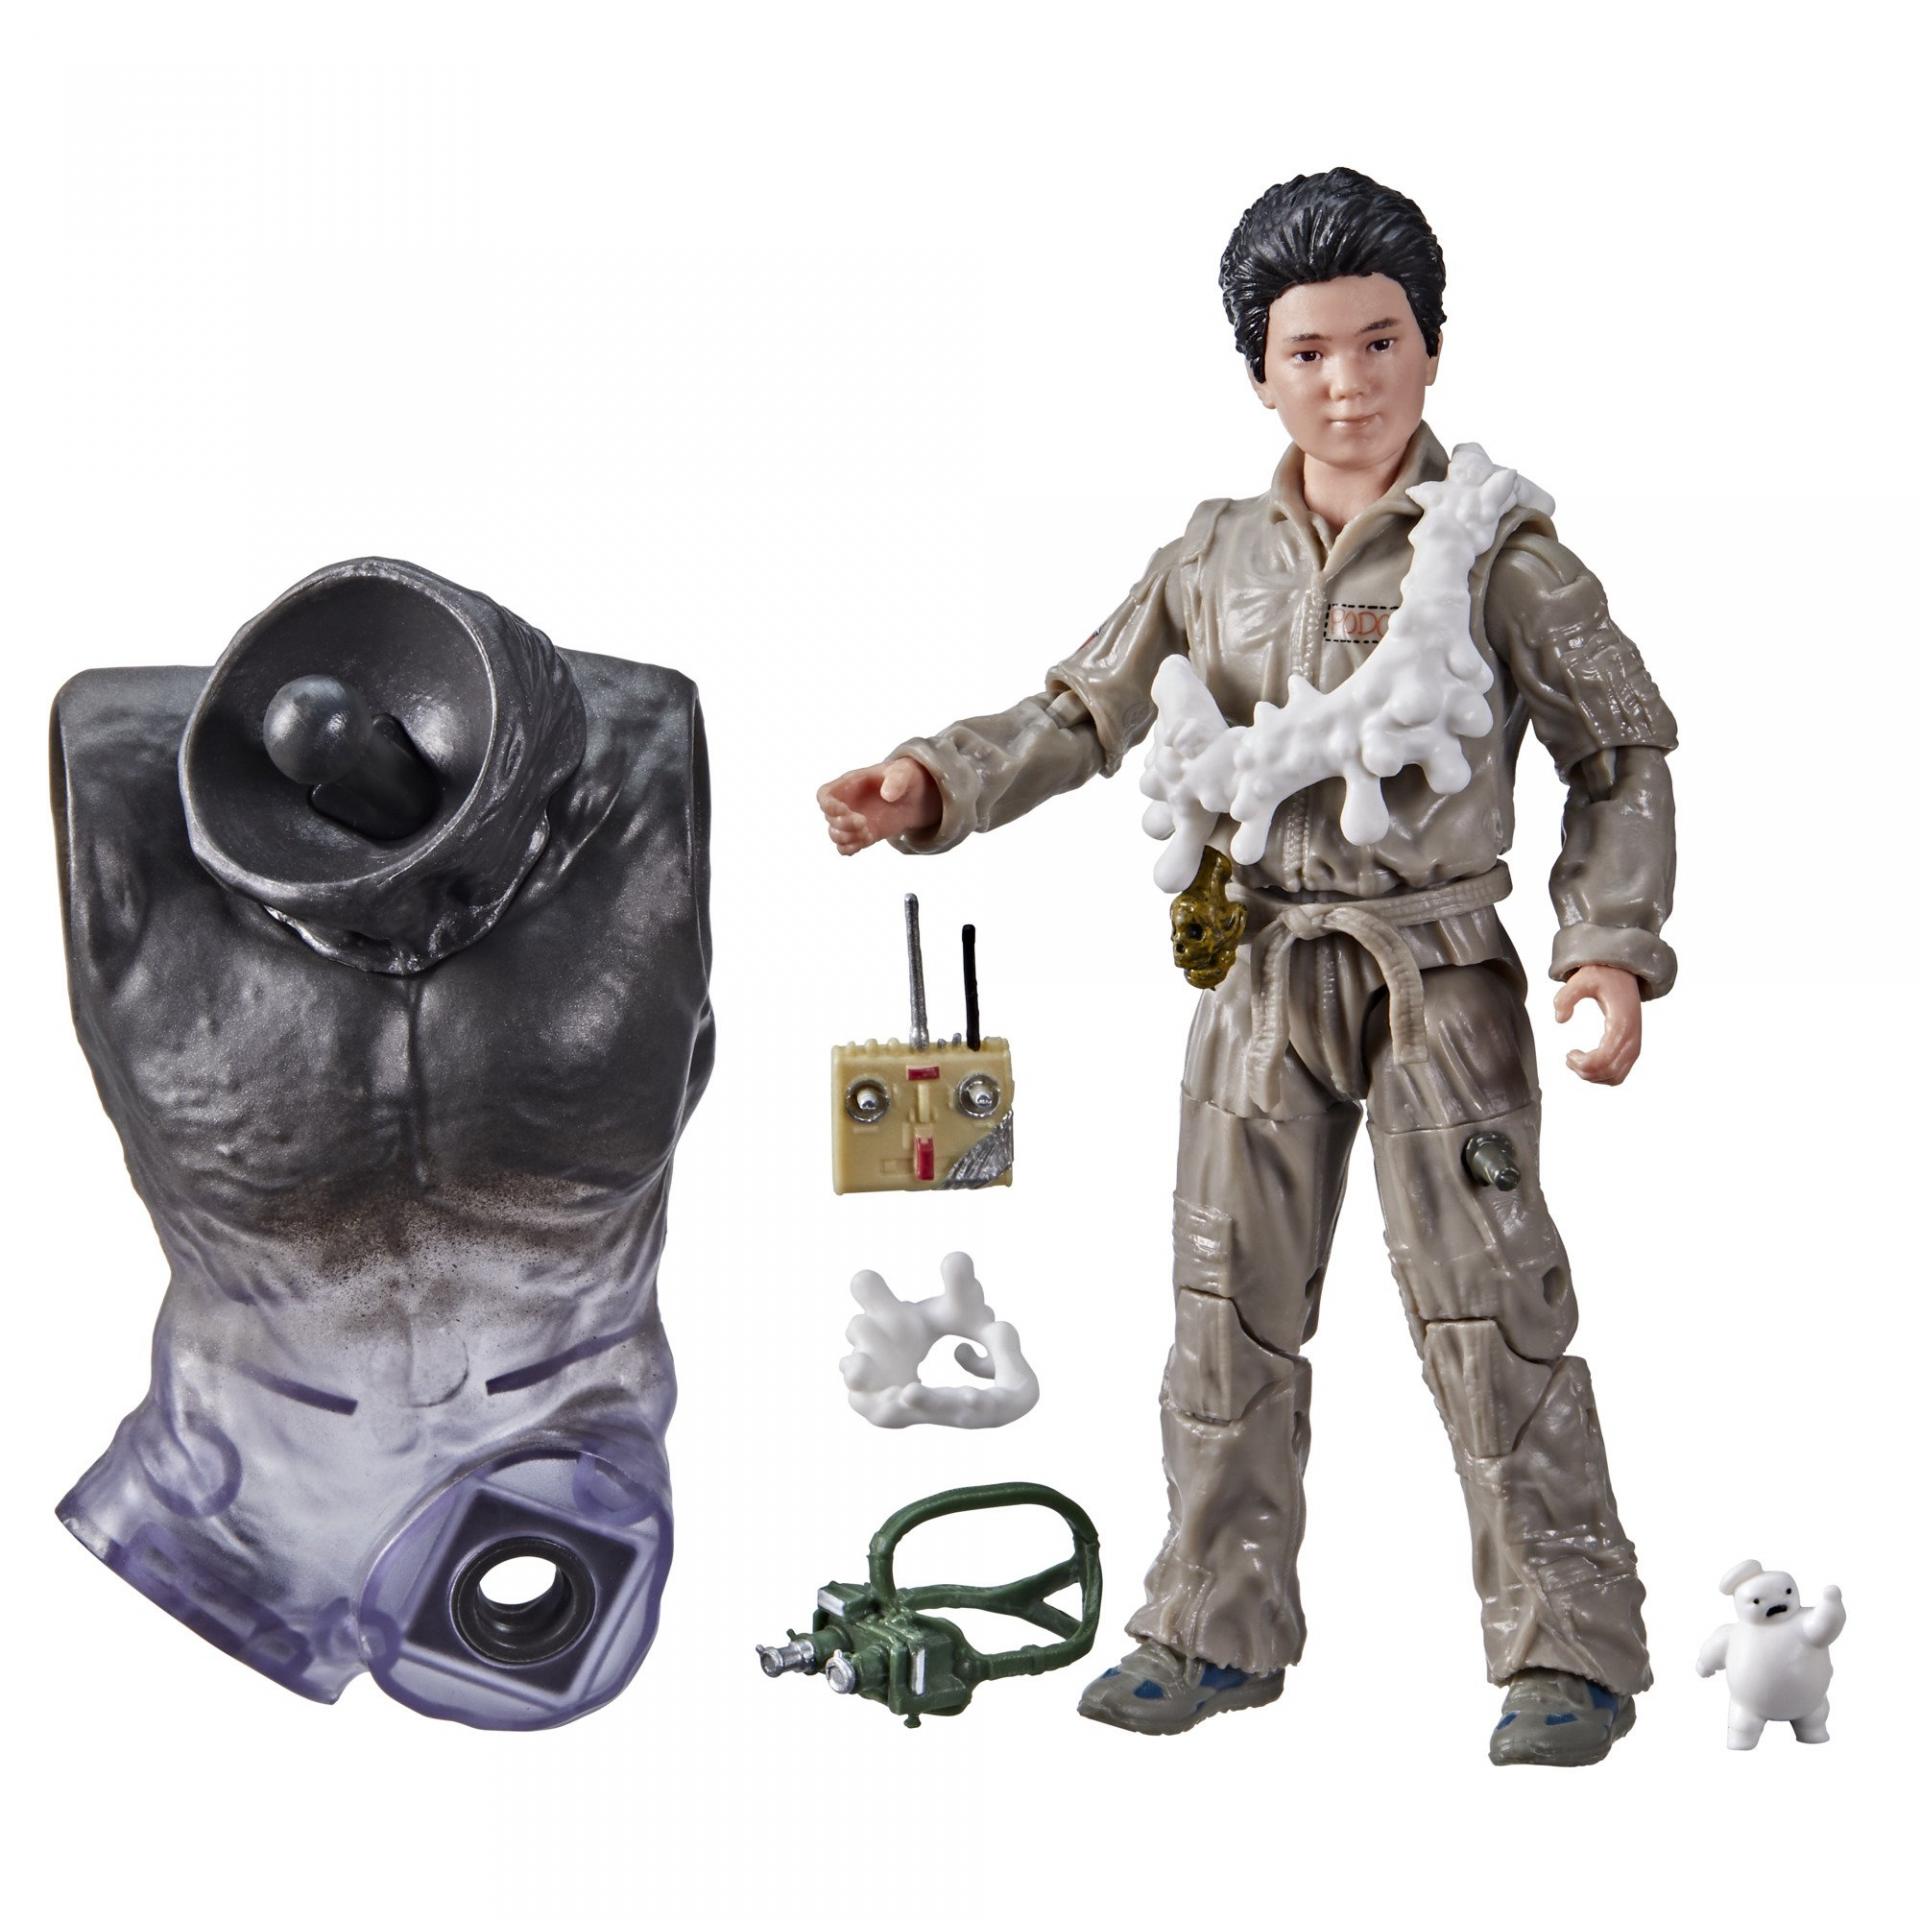 Ghostbusters hasbro plasma series afterlife podcast 15cm5